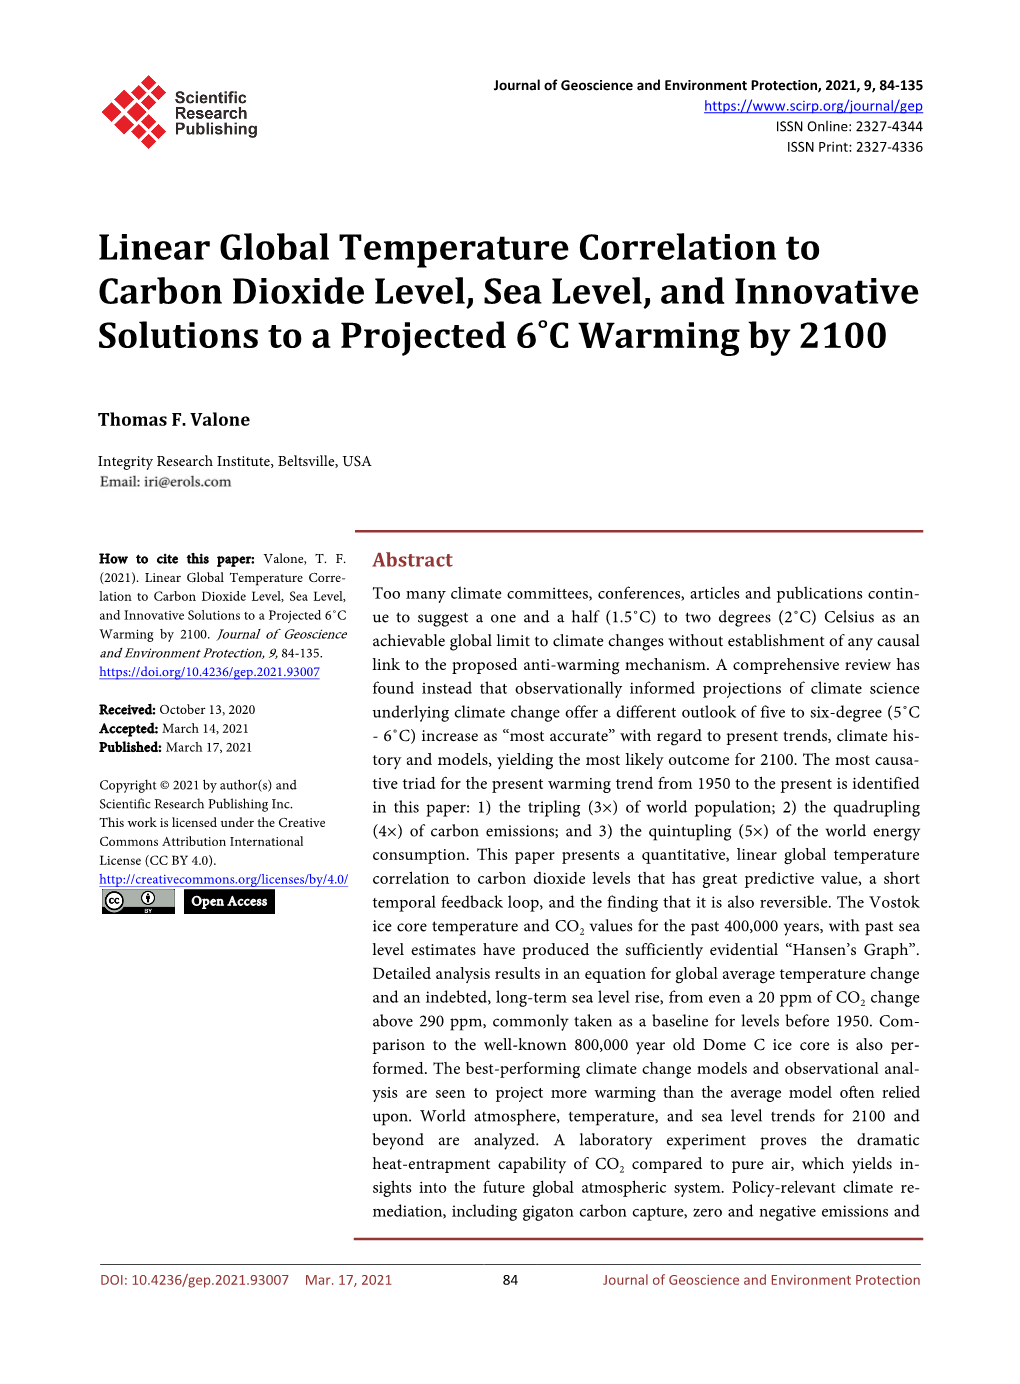 Linear Global Temperature Correlation to Carbon Dioxide Level, Sea Level, and Innovative Solutions to a Projected 6˚C Warming by 2100